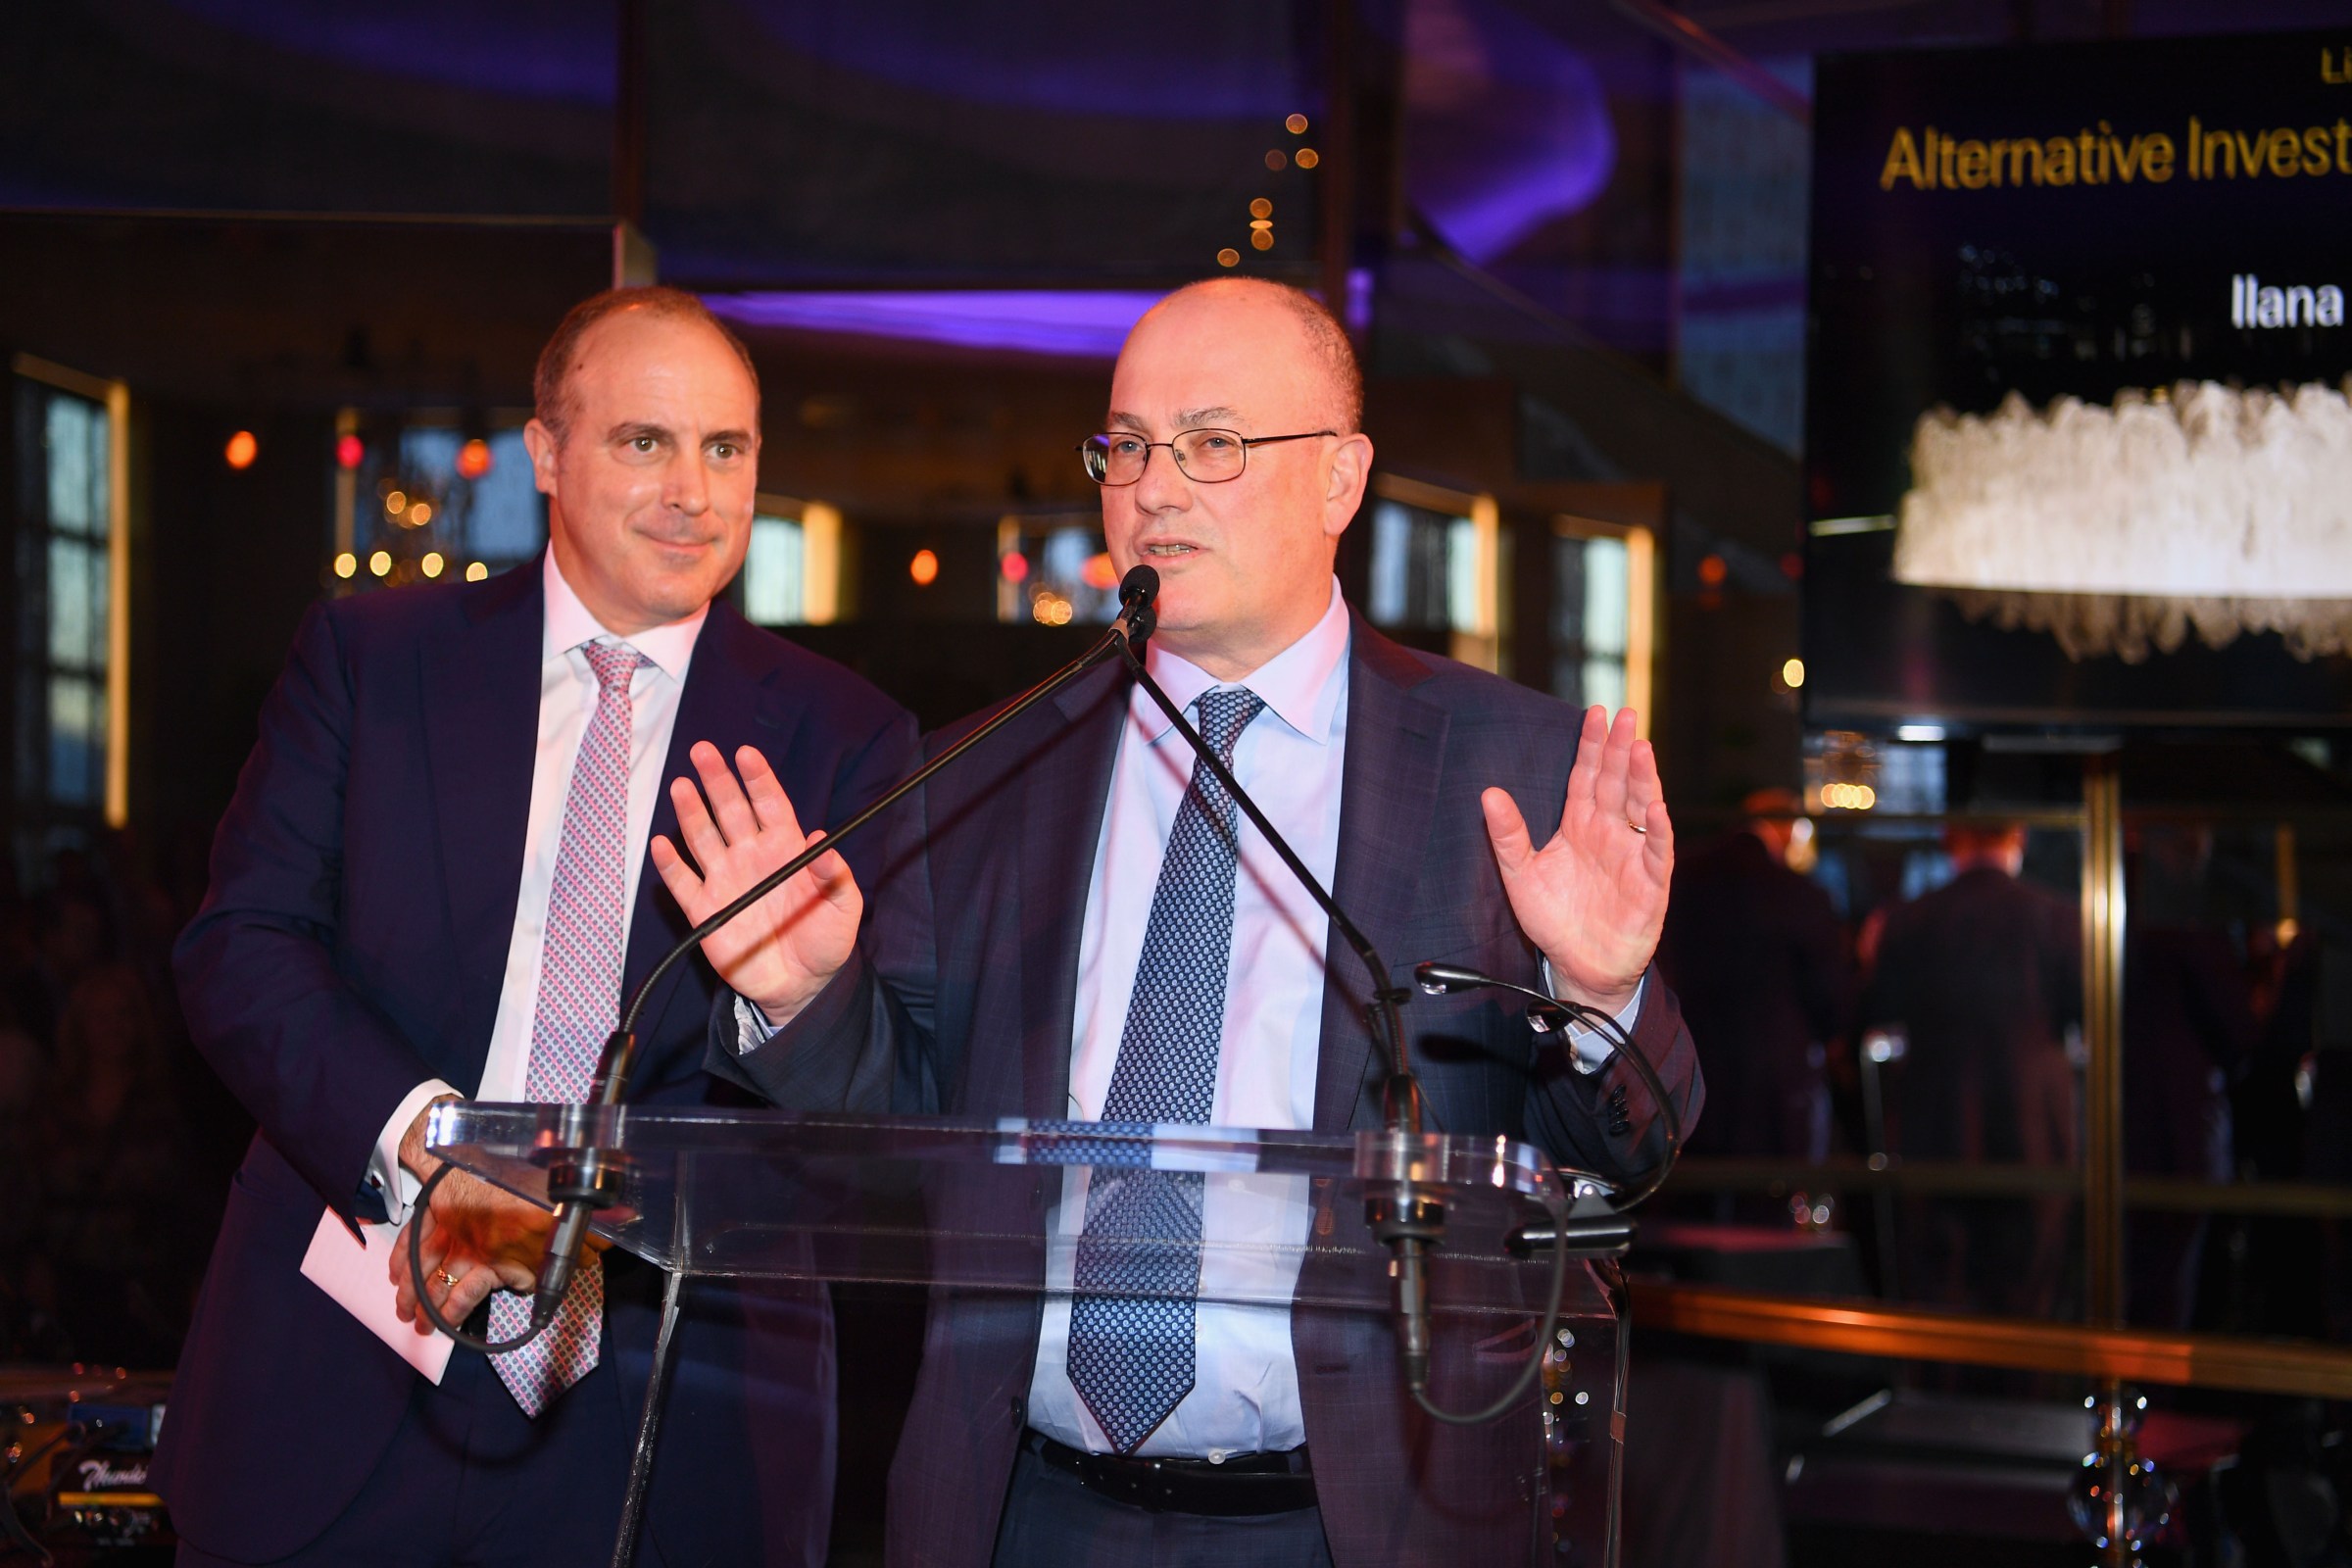 New Mets owner Steve Cohen speaks at some gala or other.